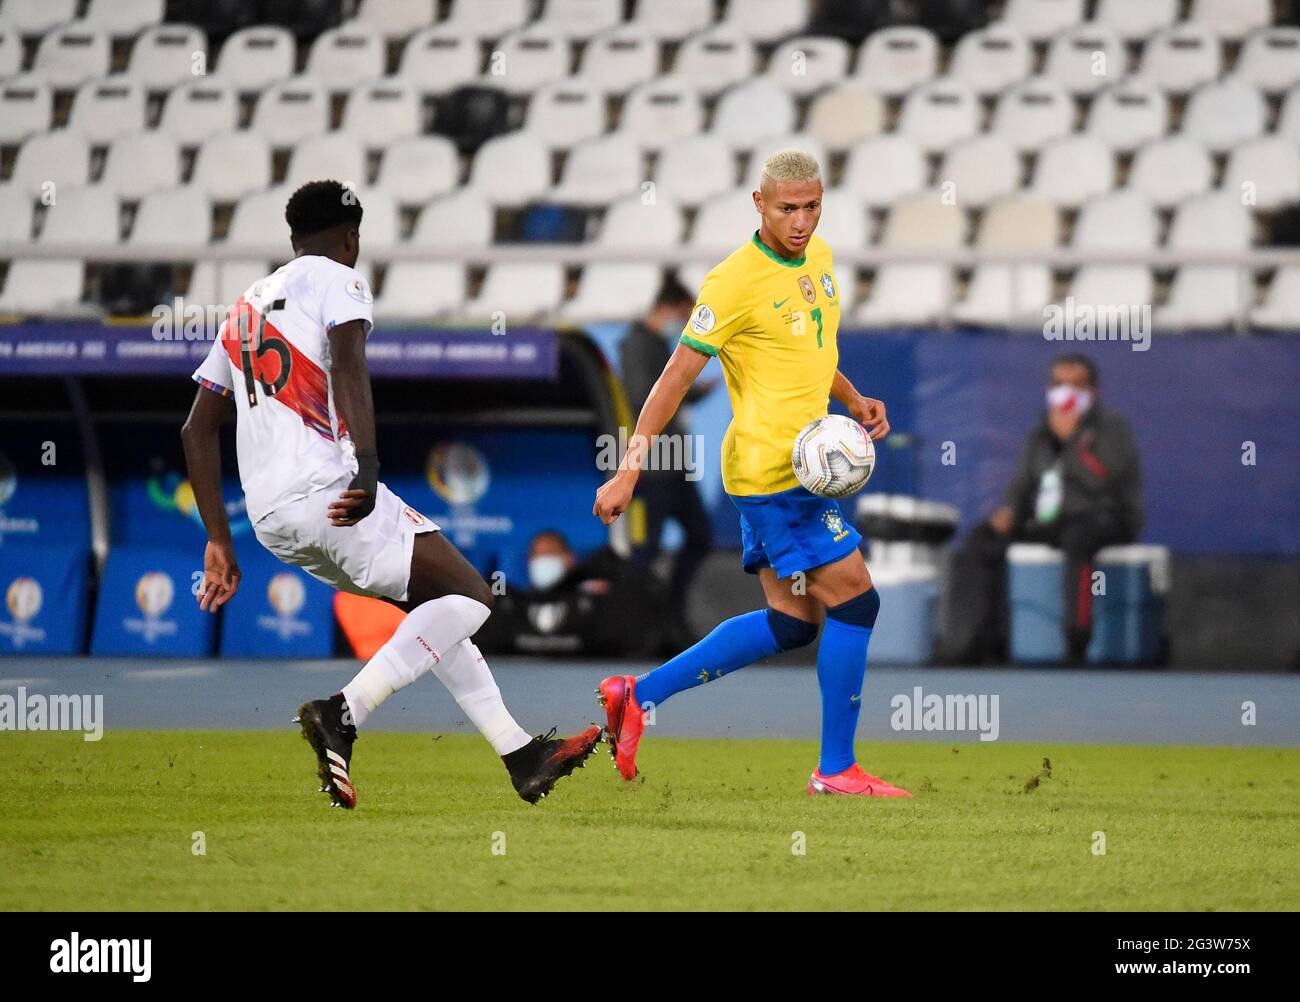 Rio de Janeiro, Brazil. 17th June, 2021: Peru's Andre Carrillo, left, and Brazil's Richarlison battle for the ball during a Copa America soccer match at Nilton Santos stadium in Rio de Janeiro, Brazil 17 Jun 2021 Credit: Andre Paes/Alamy Live News Stock Photo